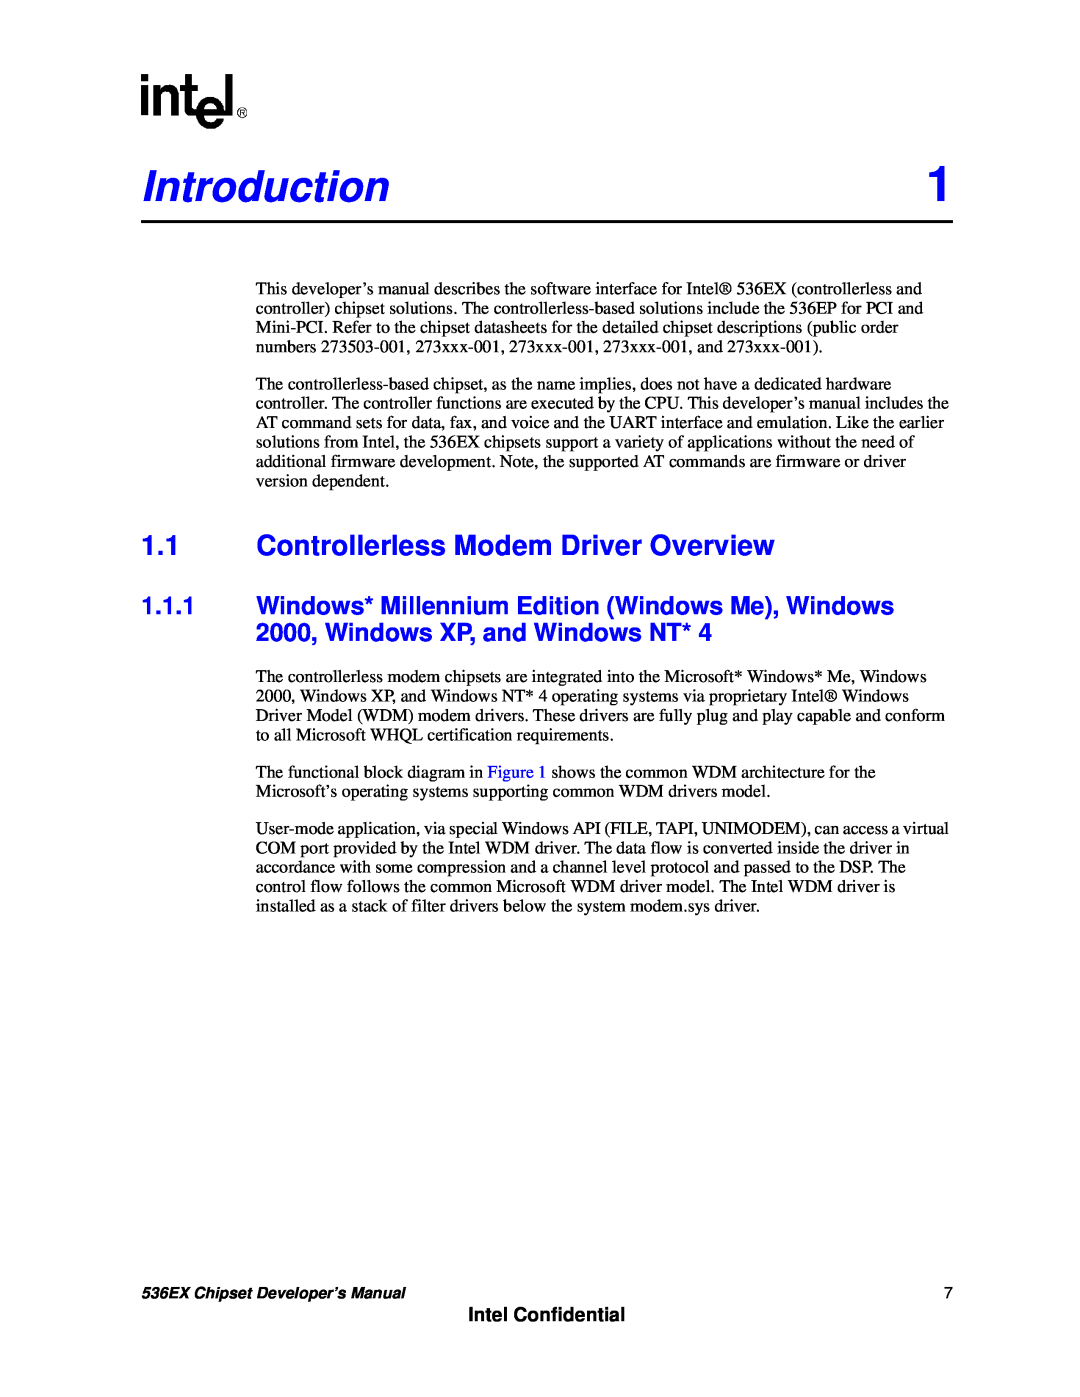 Intel 536EX manual Introduction, 1.1Controllerless Modem Driver Overview, Intel Confidential 